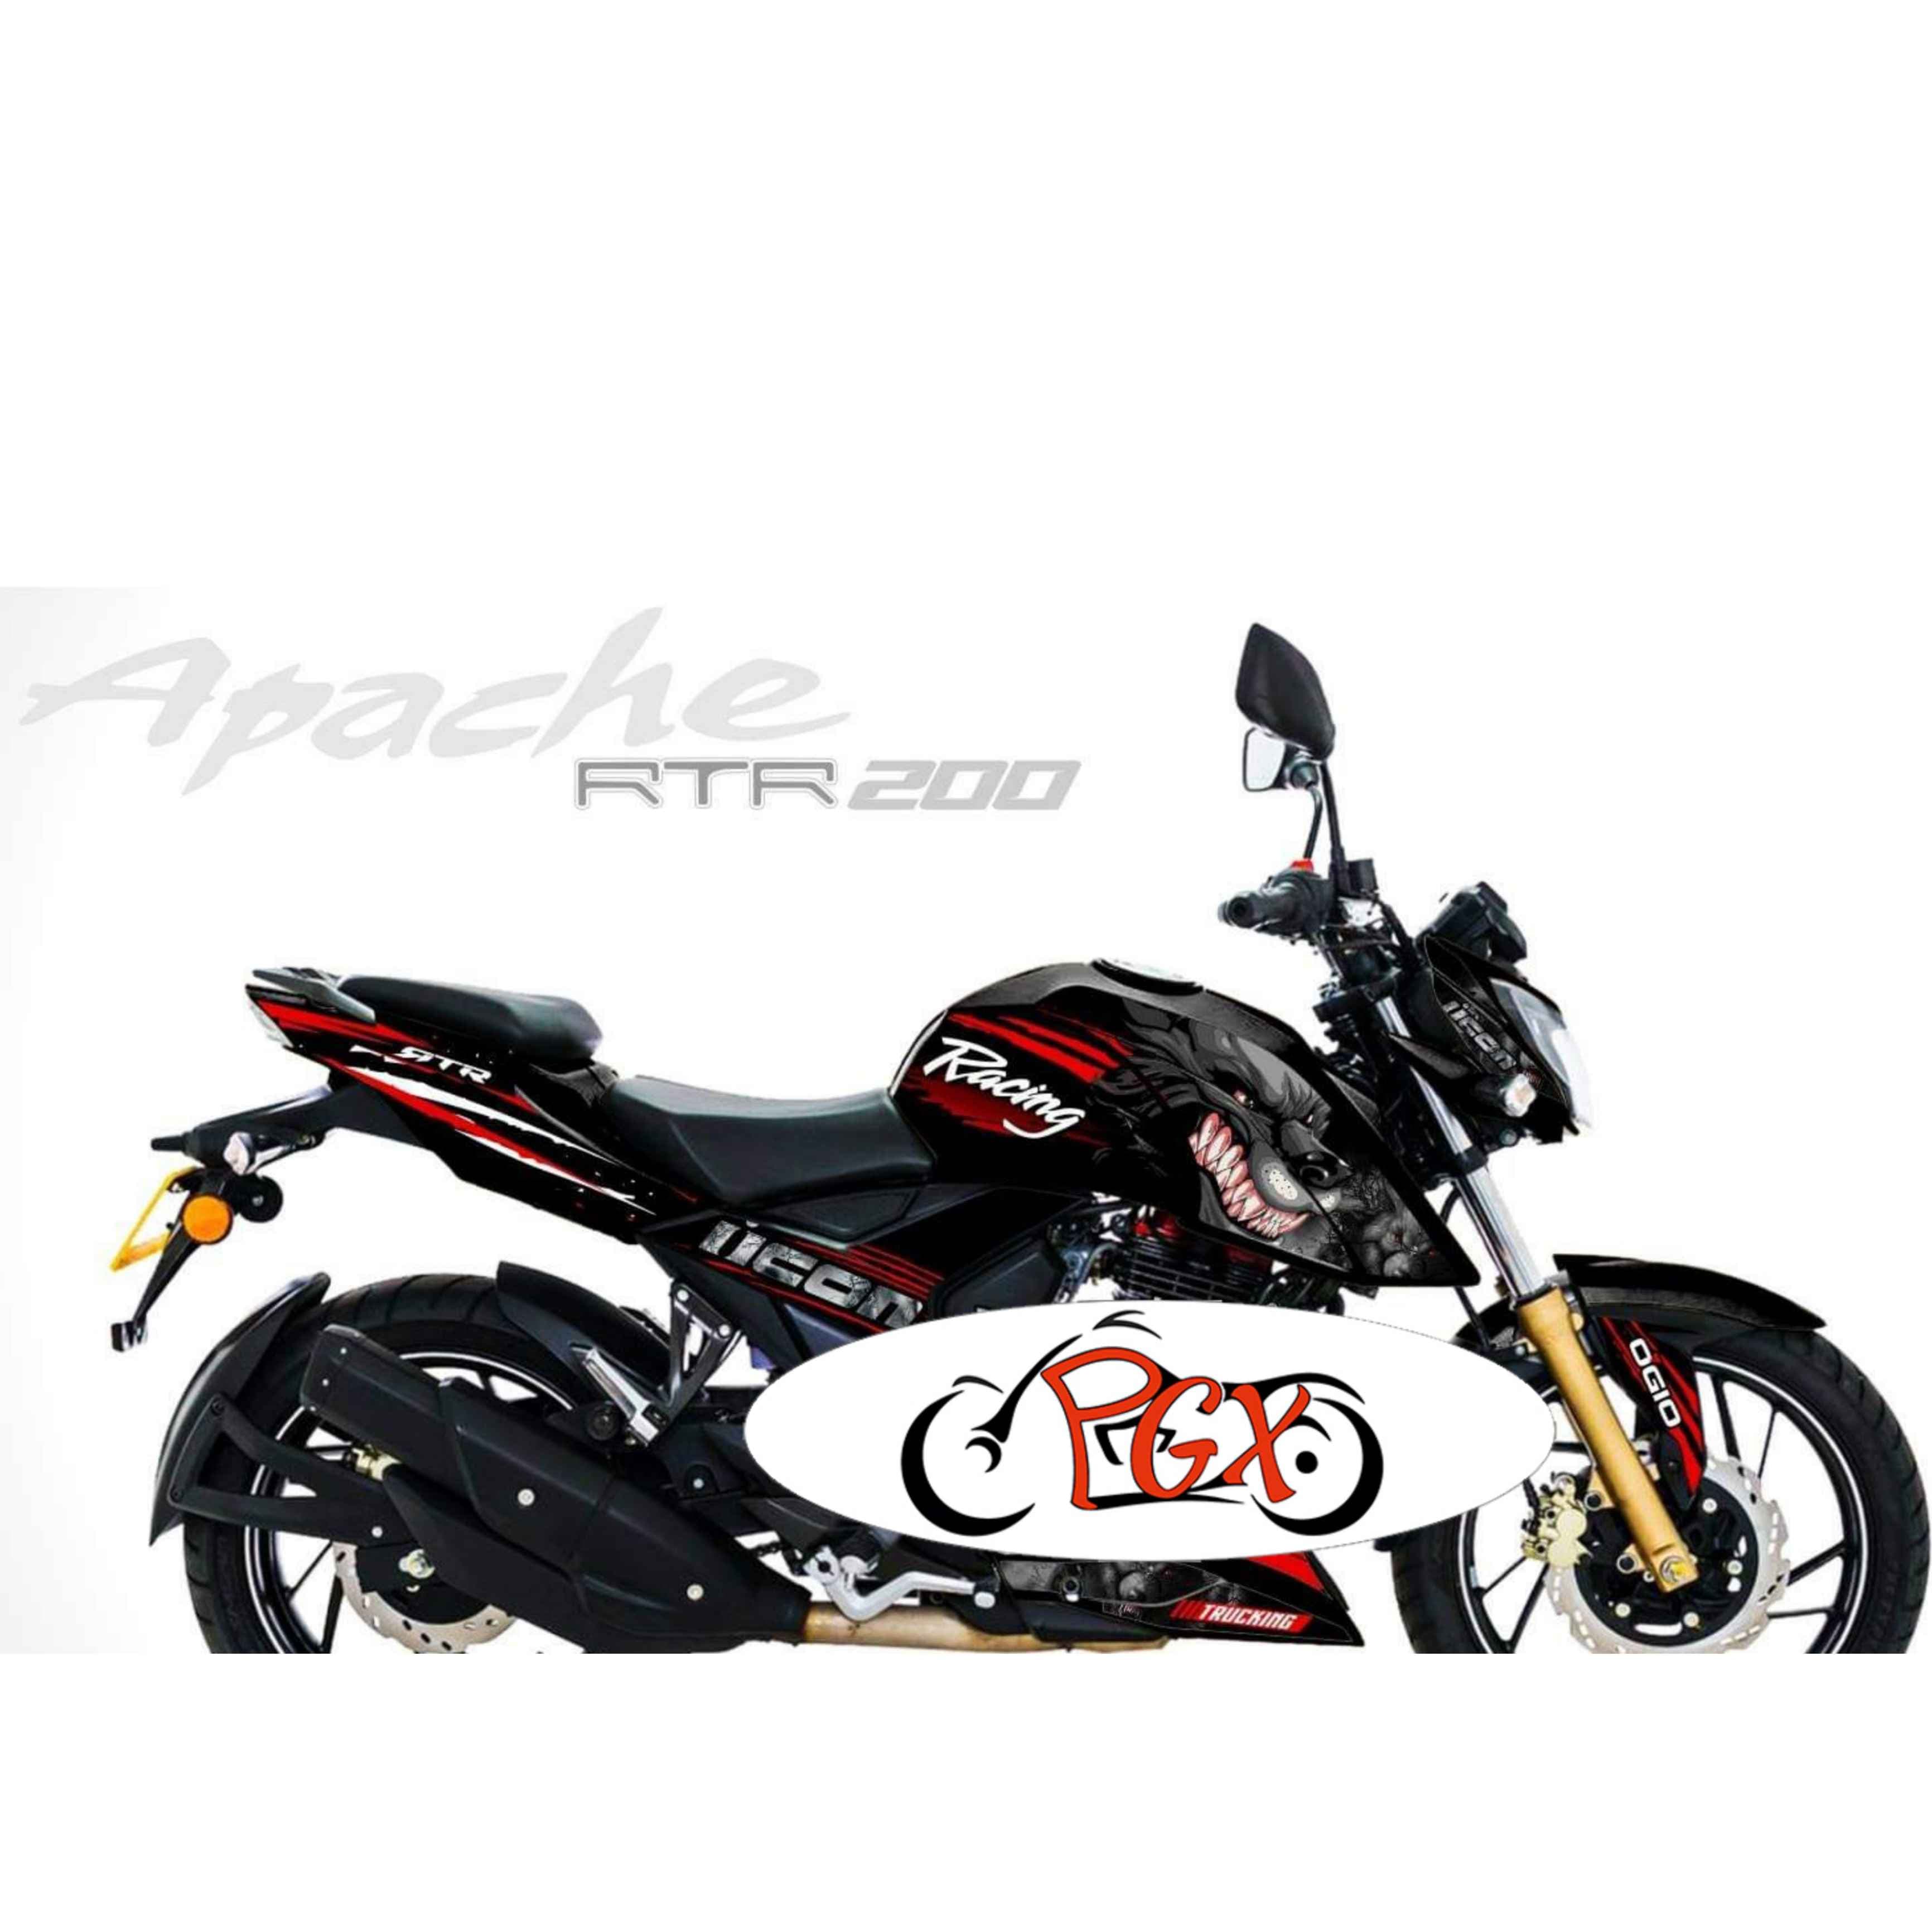 FULL BODY DECALS FOR APACHE RTR 160/200 4V